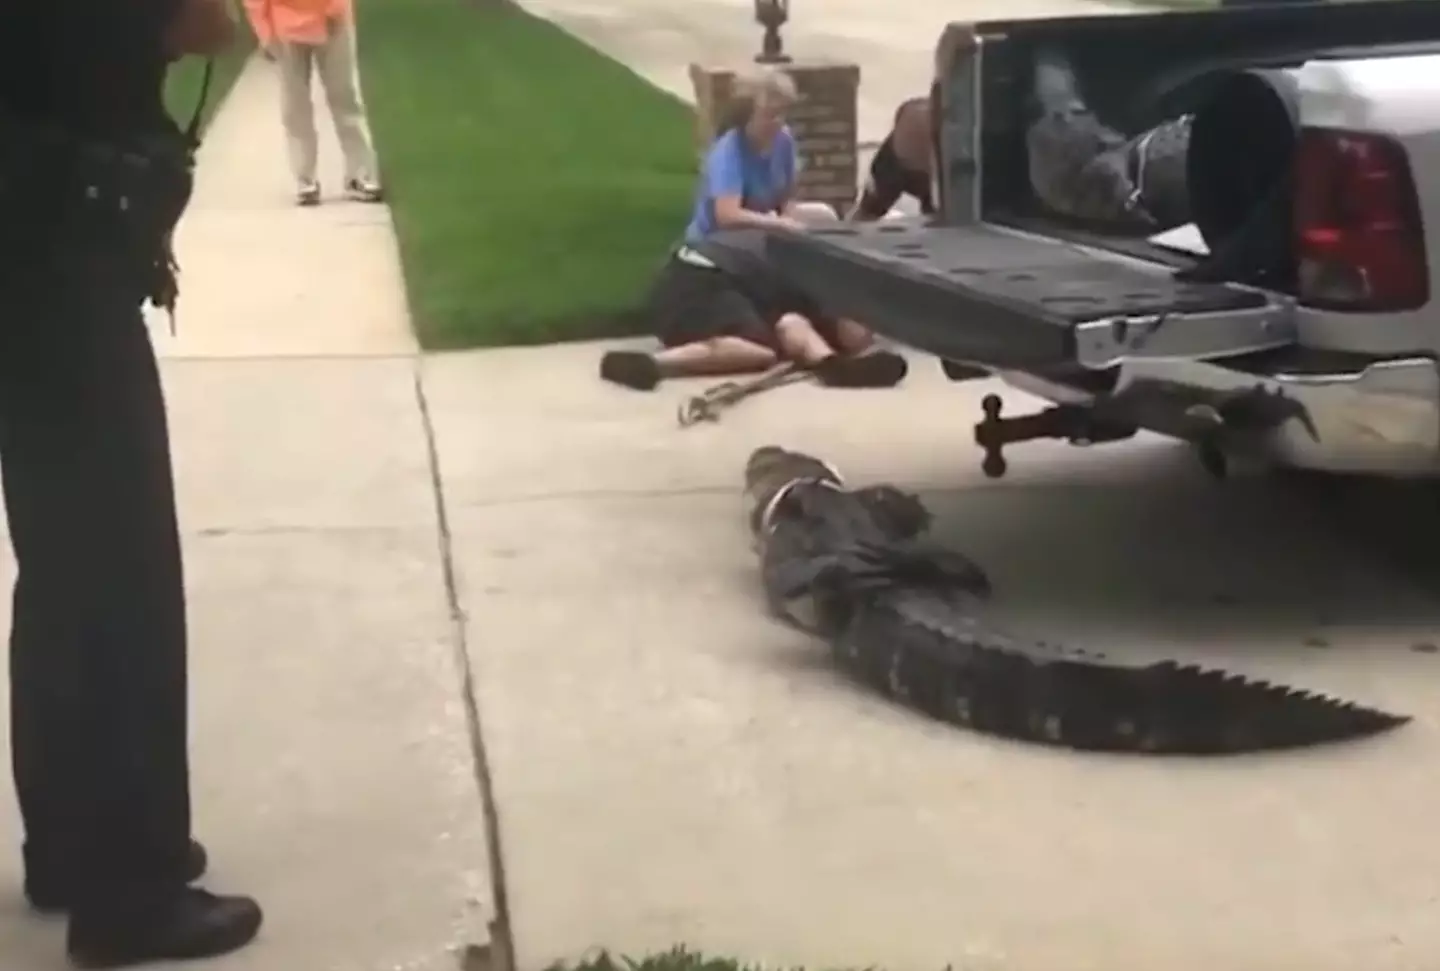 The alligator was later re-captured and taken away.